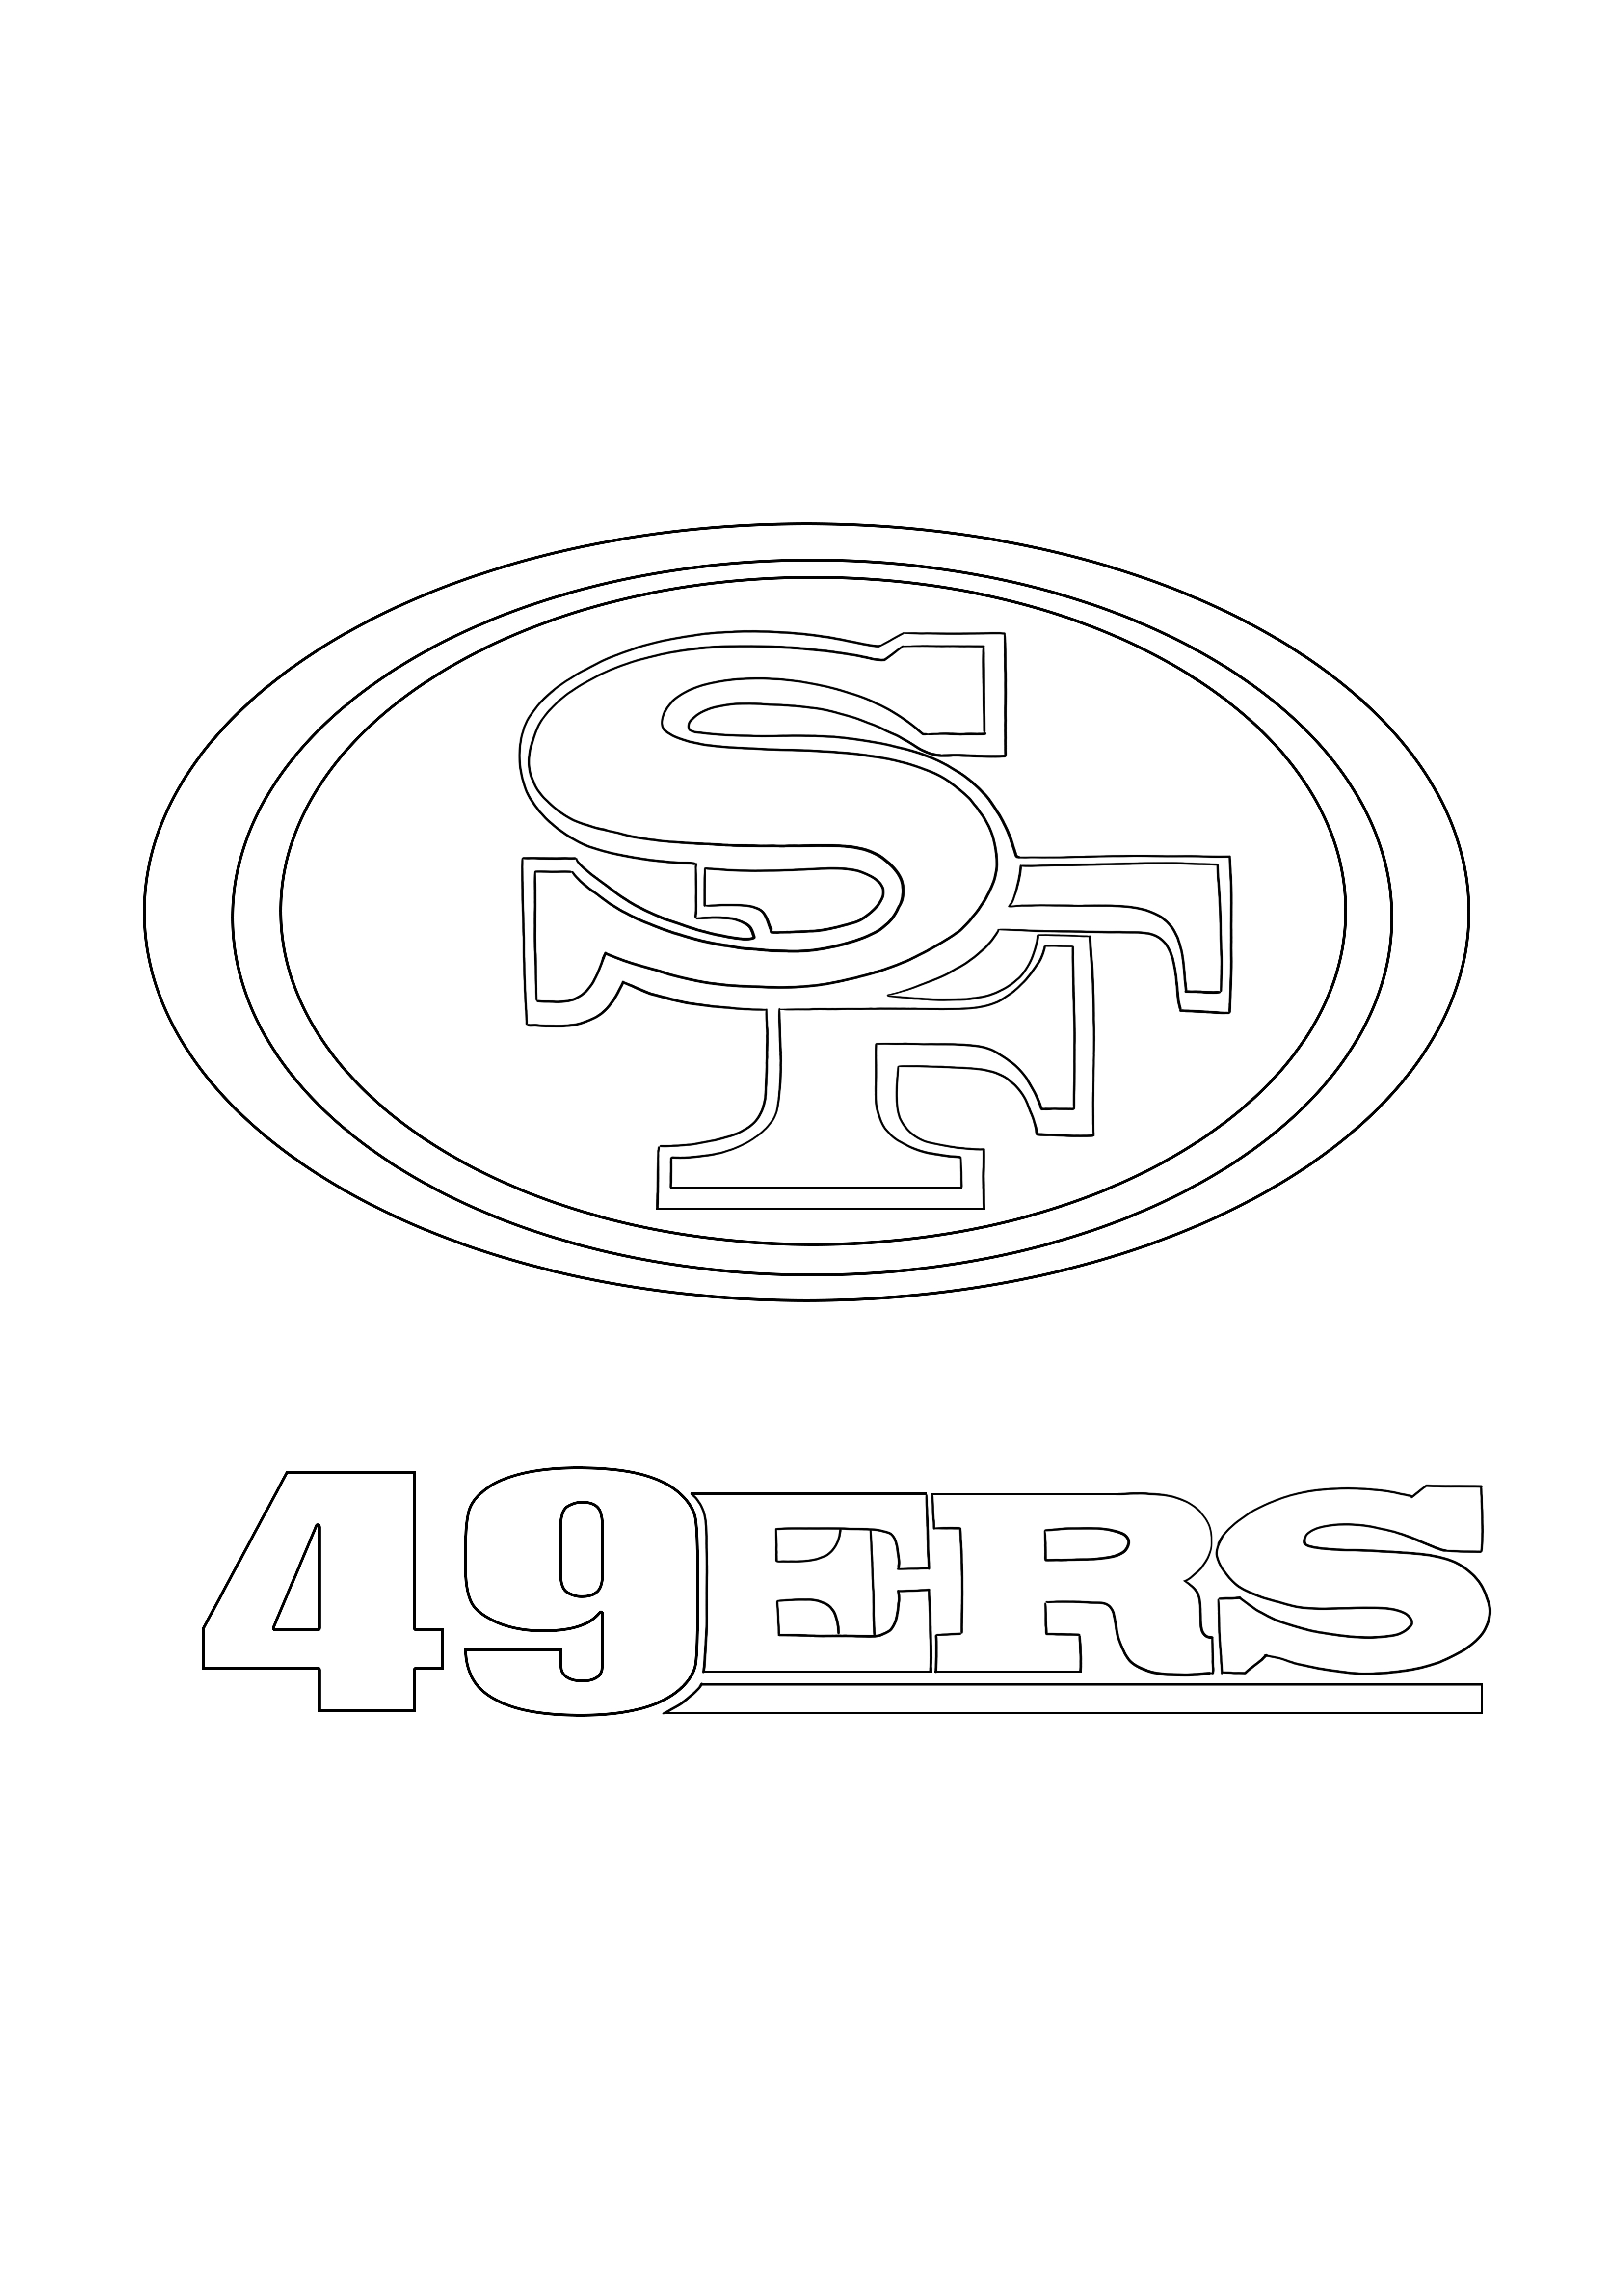 San francisco ers logo downloading and coloring for free sheet